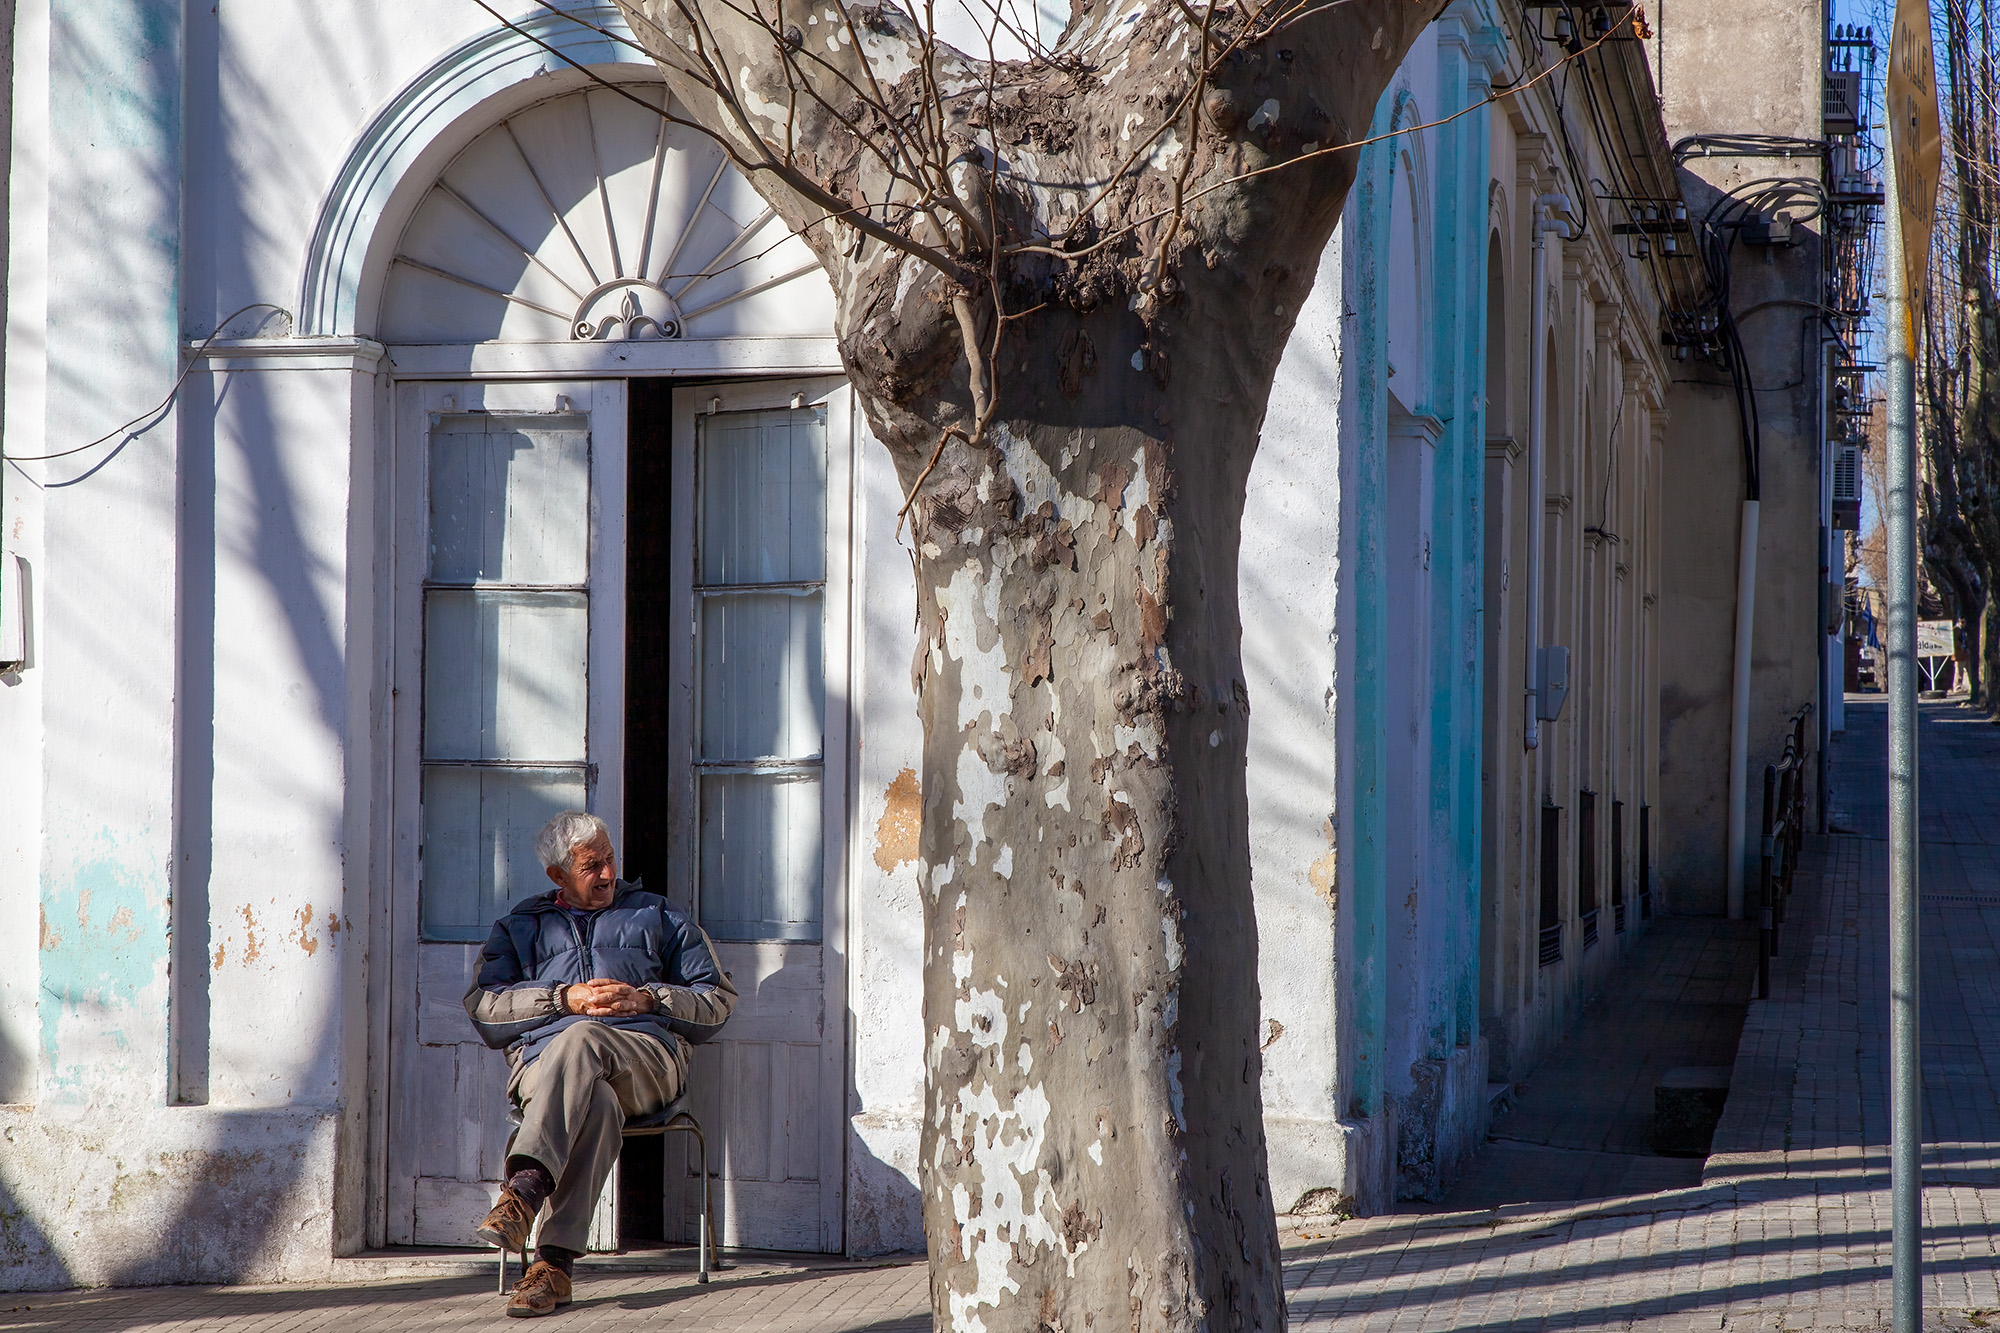 In the quaint streets of Colonia del Sacramento, Uruguay, a solitary figure finds solace in the warm embrace of sunlight. This...